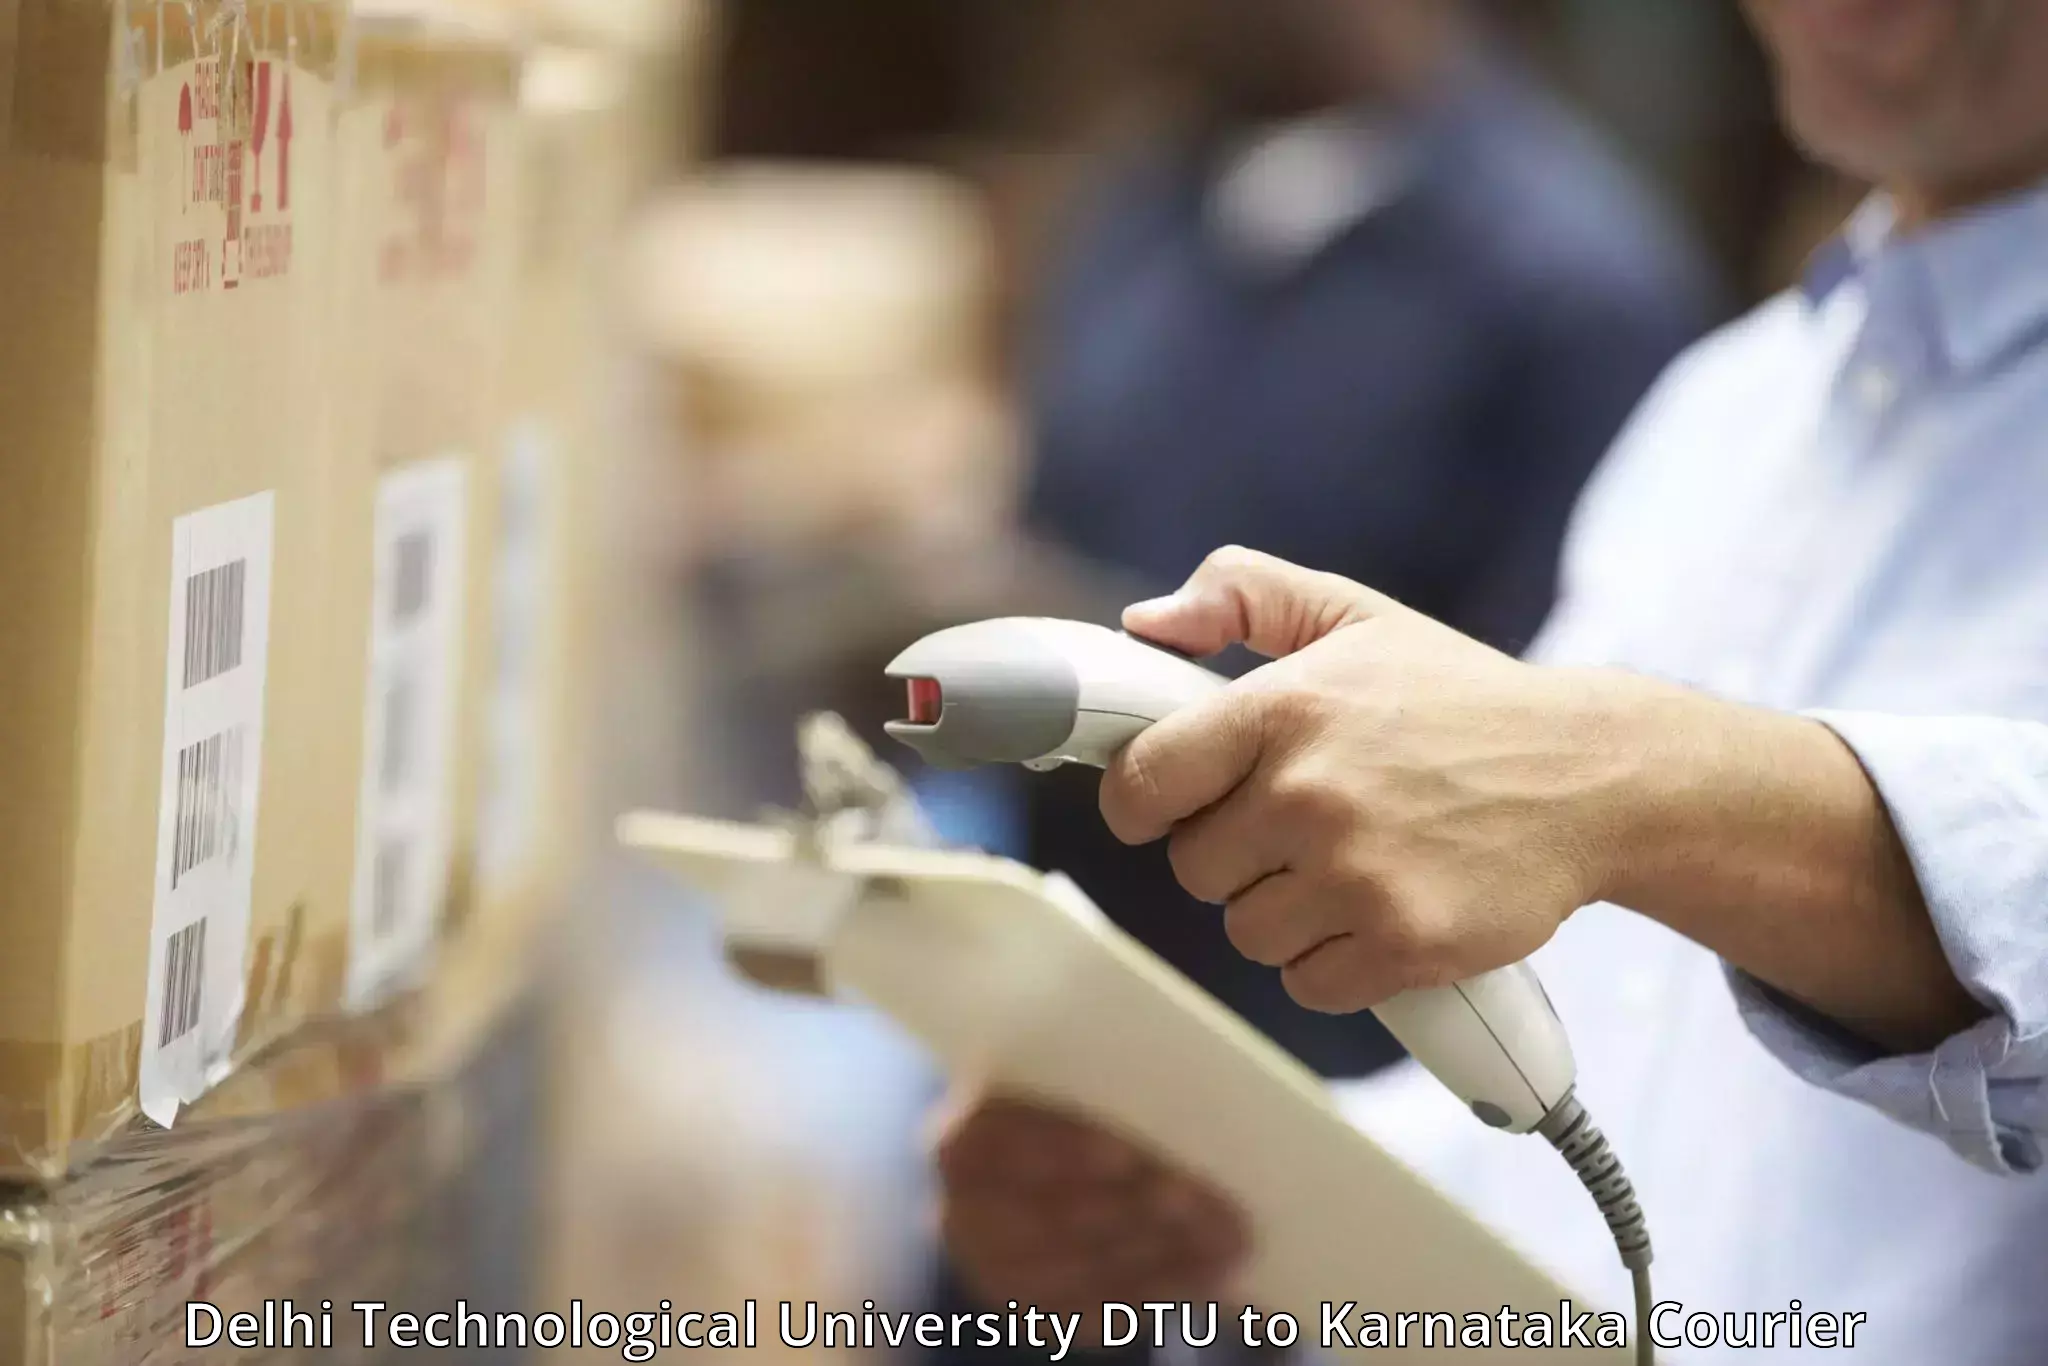 Luggage shipping guide Delhi Technological University DTU to Manipal